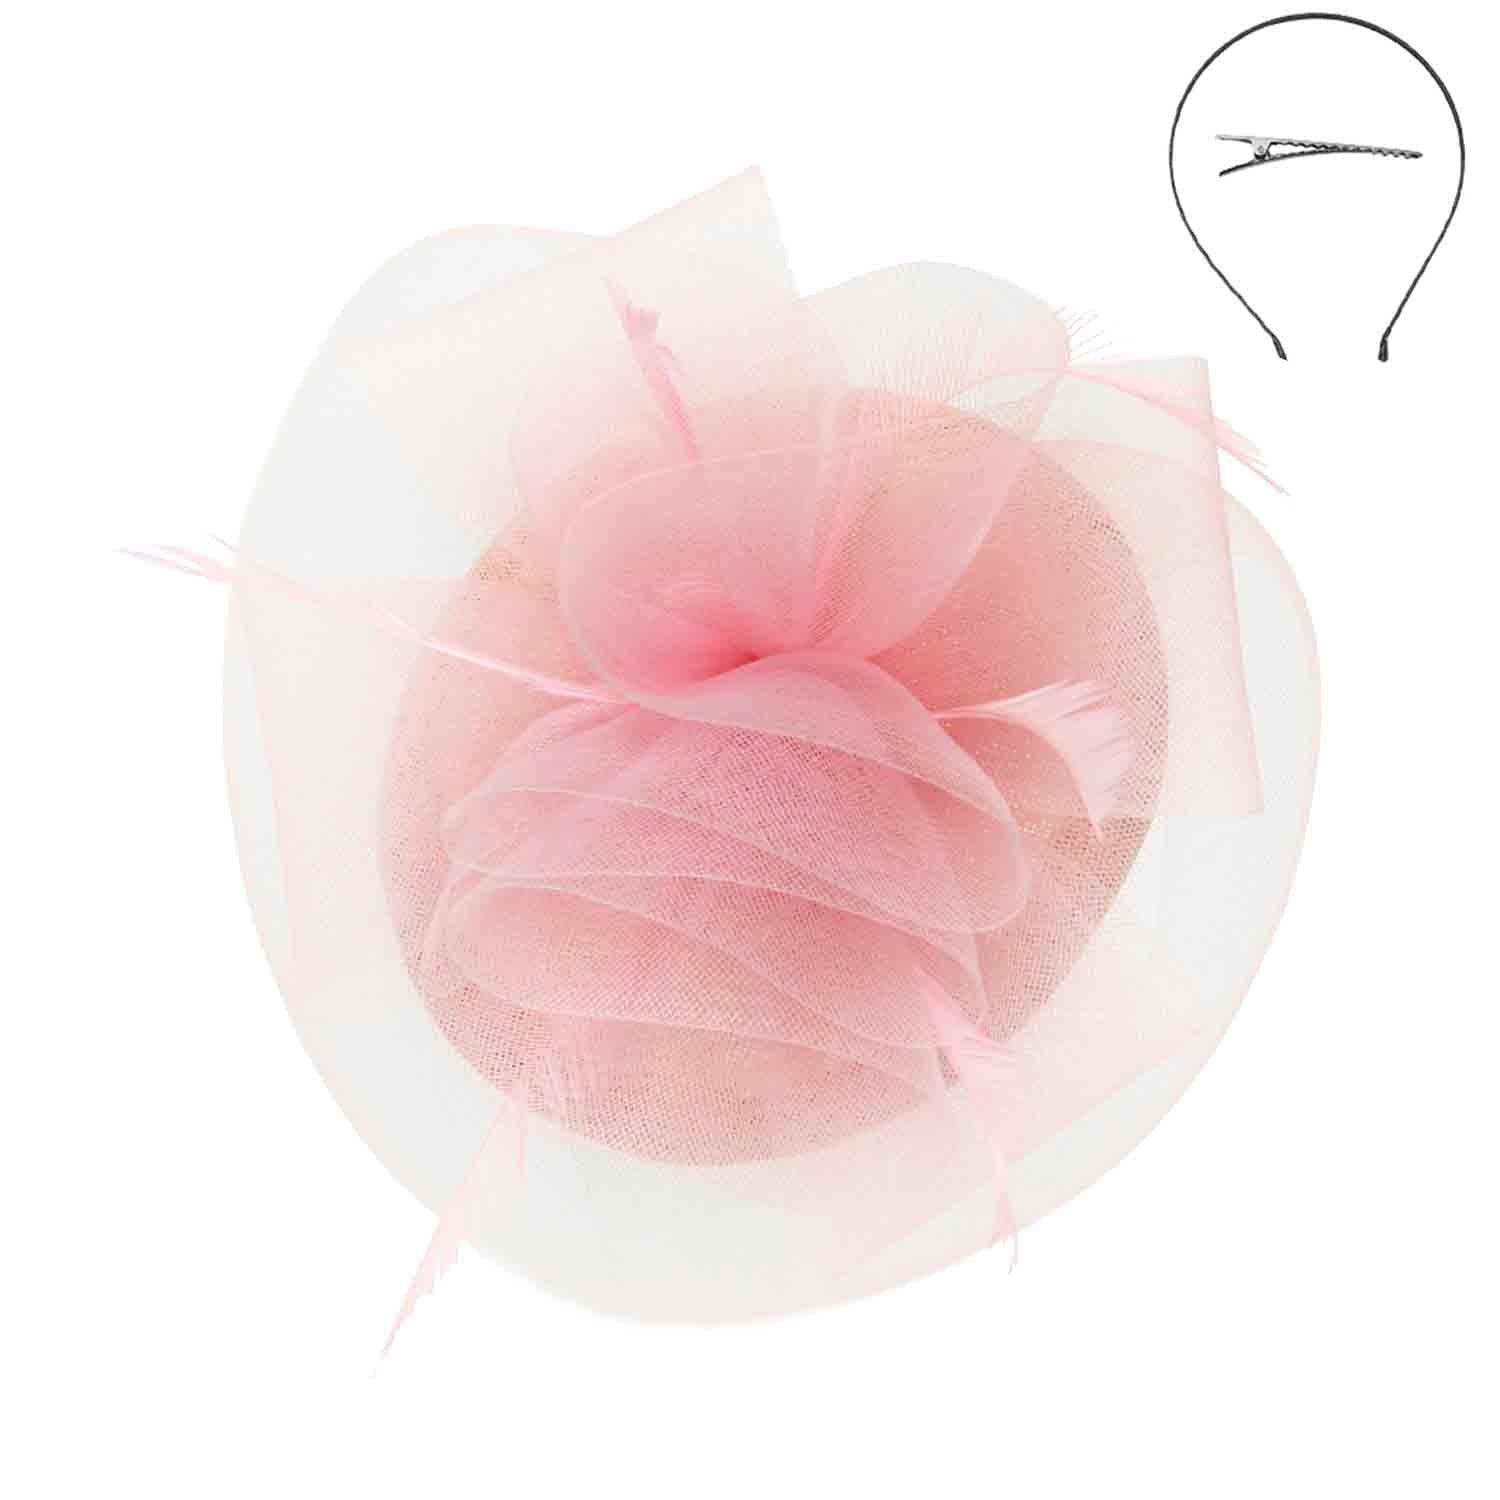 Woven Pillbox Cocktail Hat with High Tulle Accent - Sophia Collection Fascinator Something Special LA HTH2255pk Pink  